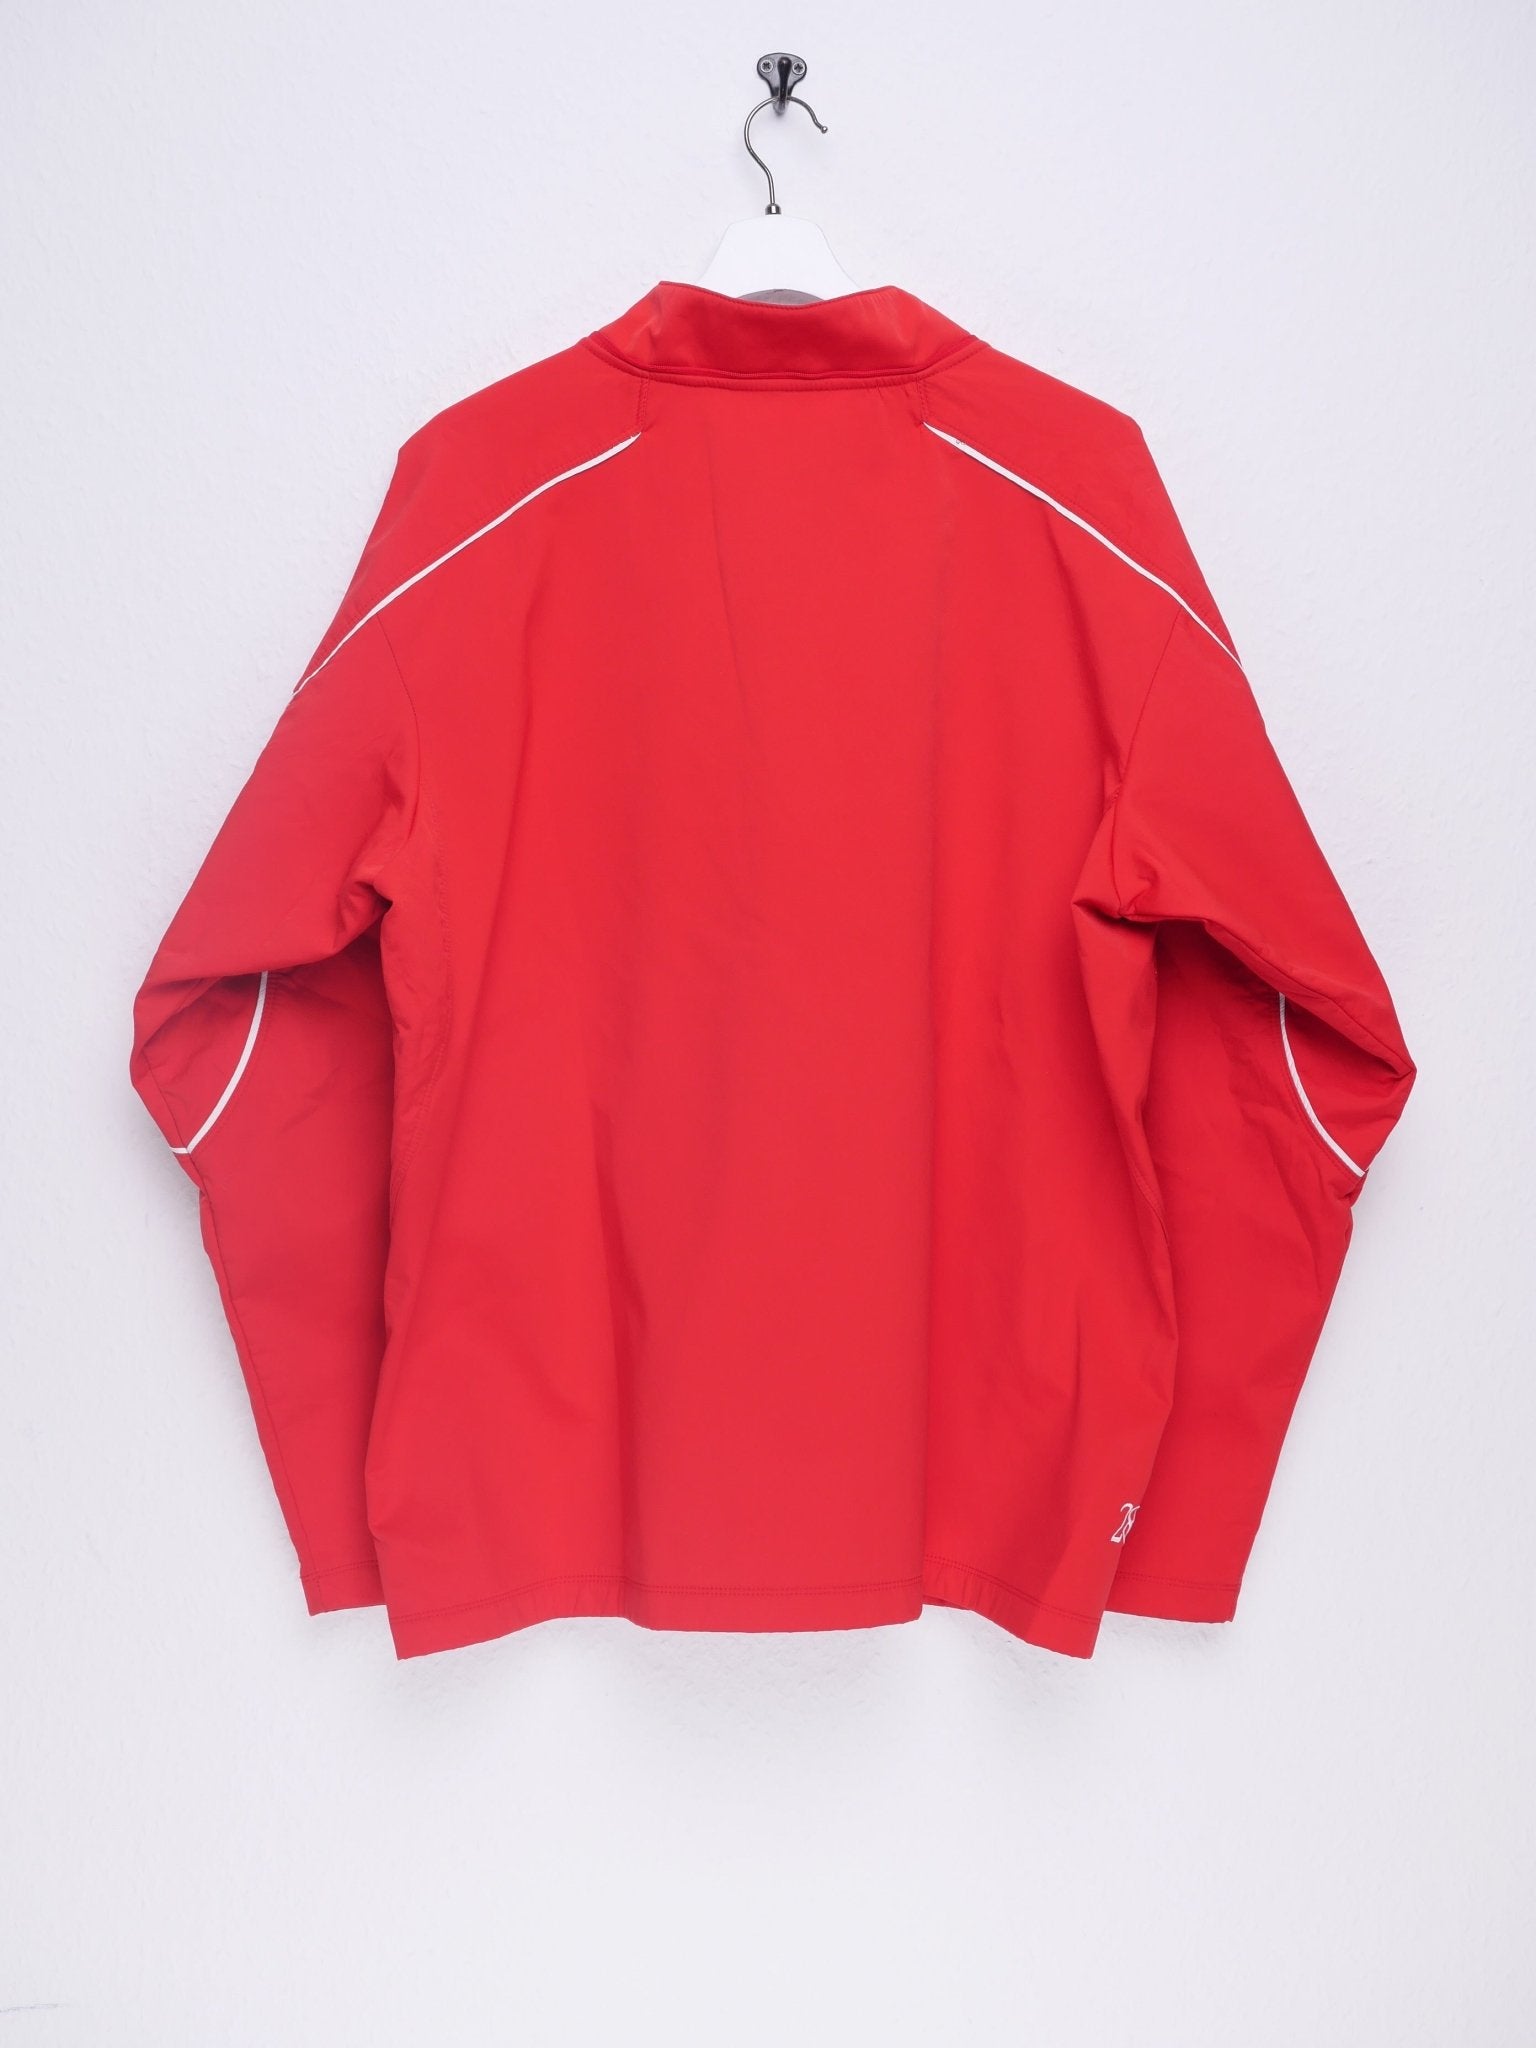 nike embroidered Swoosh red Track Jacket - Peeces